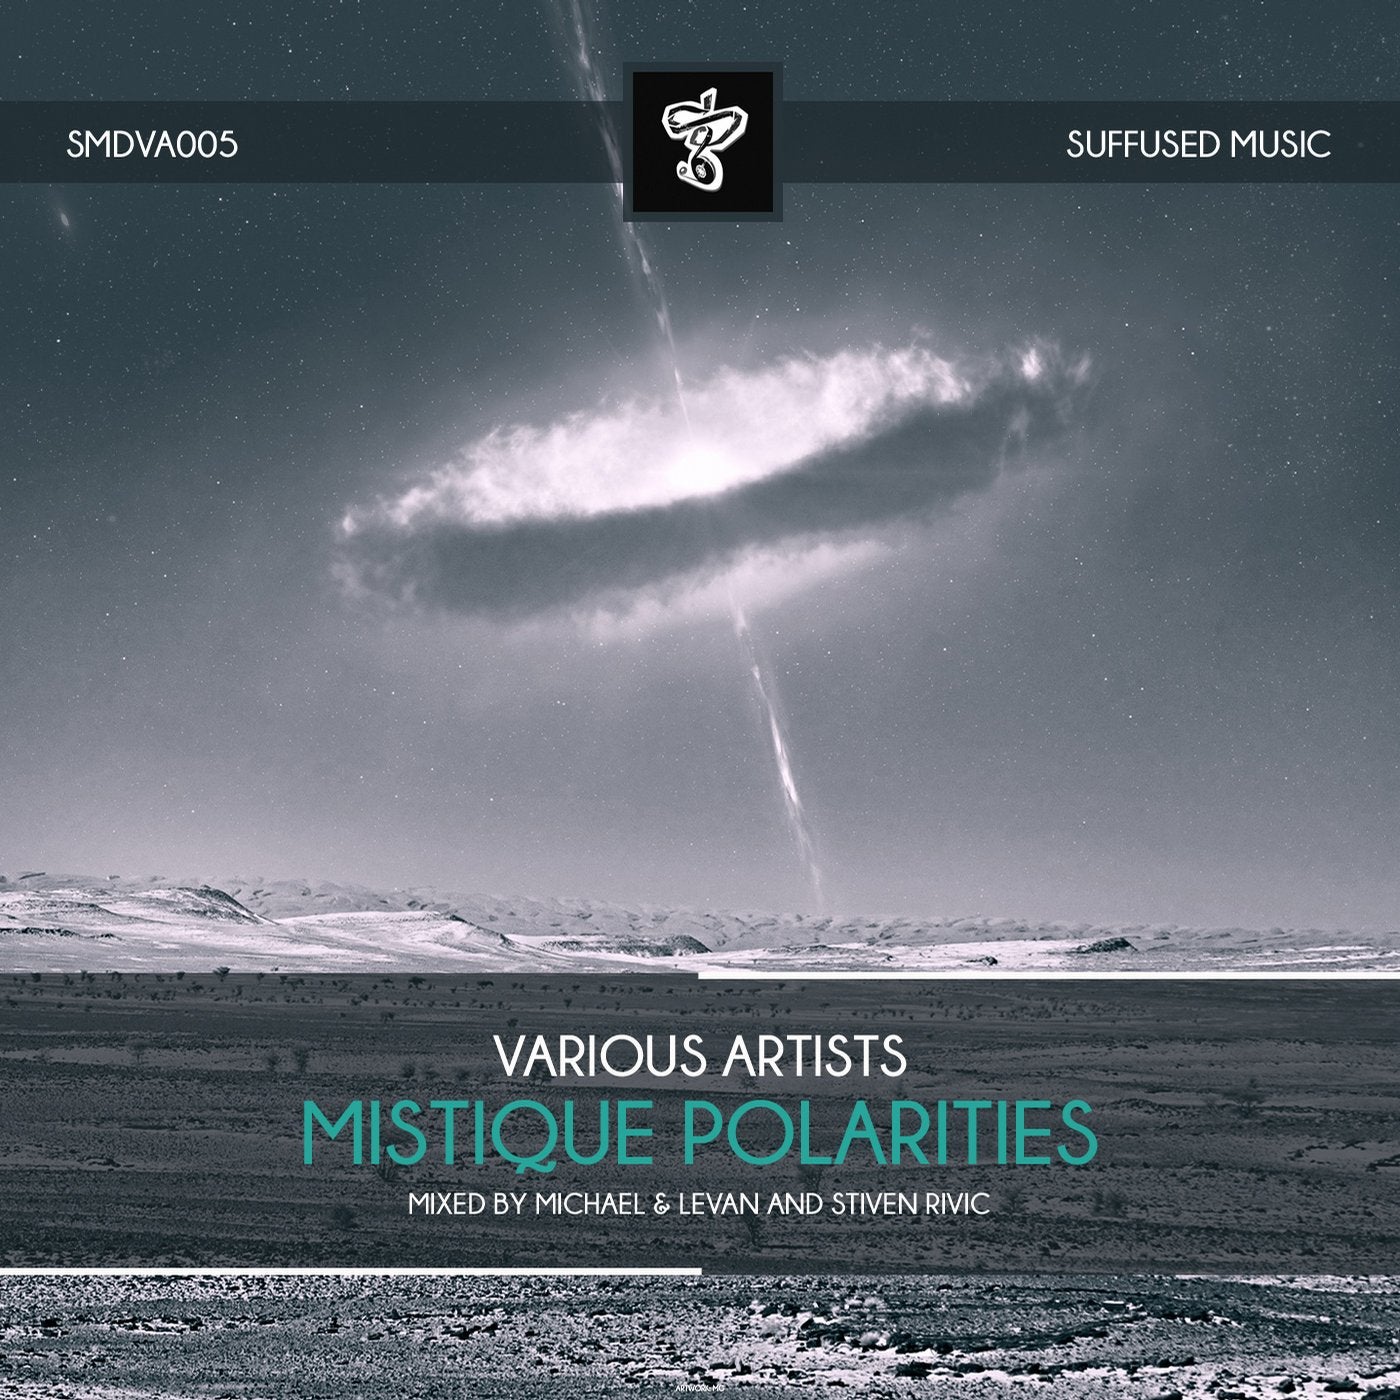 Mistique Polarities (Mixed by Michael & Levan and Stiven Rivic)